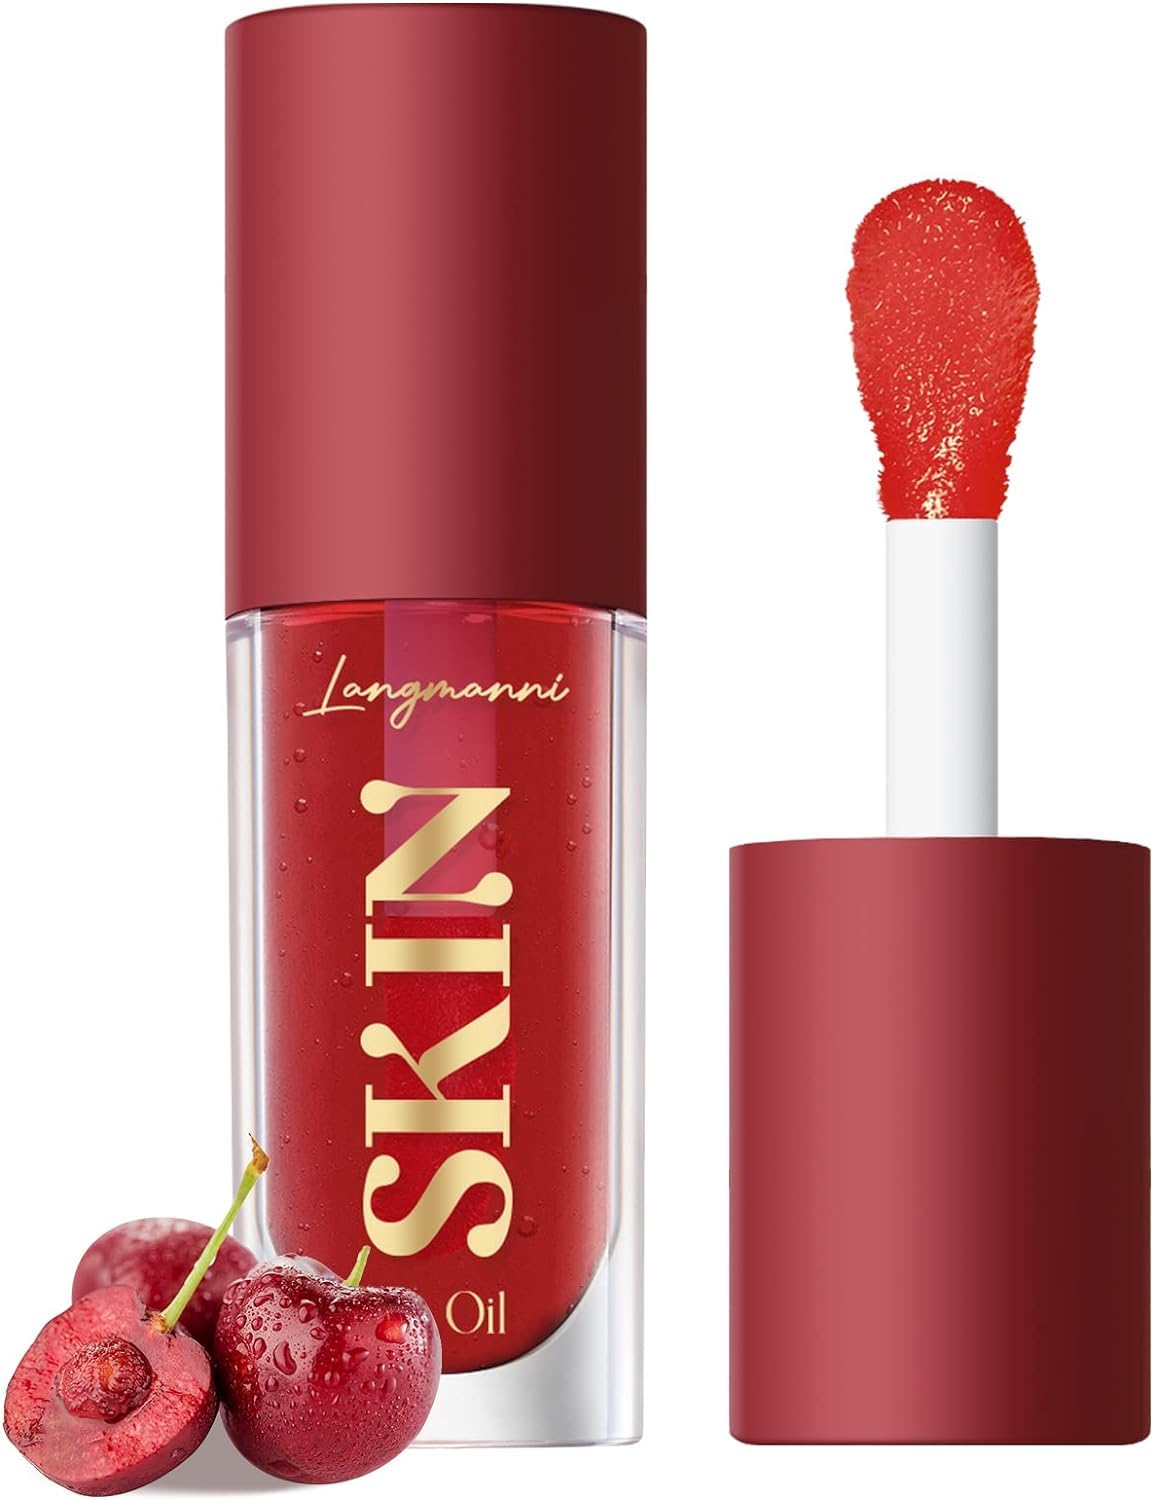 LANGMANNI Lip Oil.No-Sticky Gloss Lip Balm Lip Care.Fruit Flavoured Lip Oil For Dry Lip's Moisturizing Hydrating And Nourishing (Strawberry+Coco)